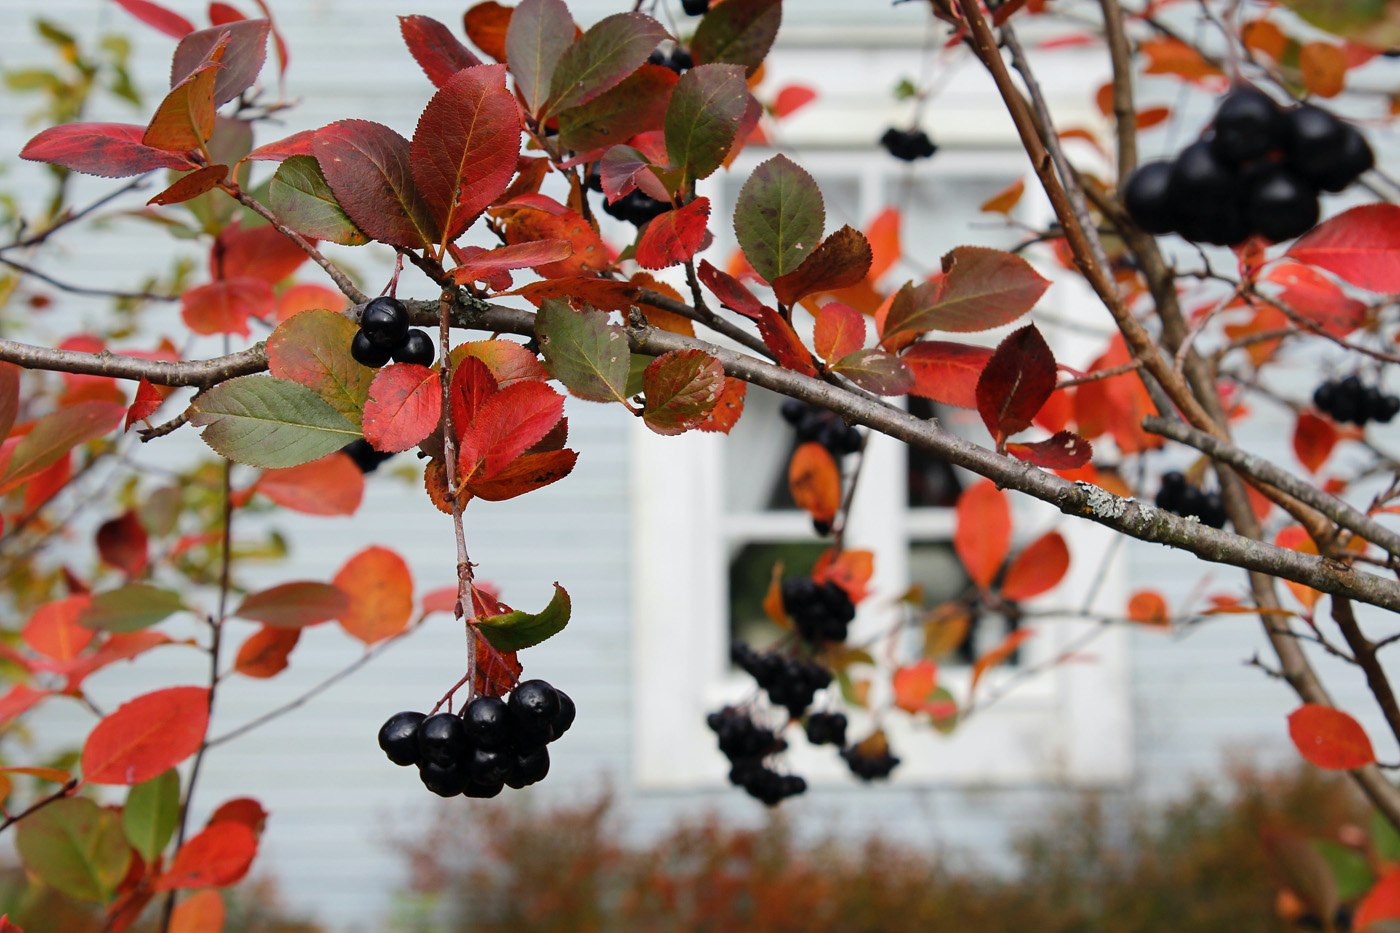 ripe elderberries hanging from tree with fall leaves